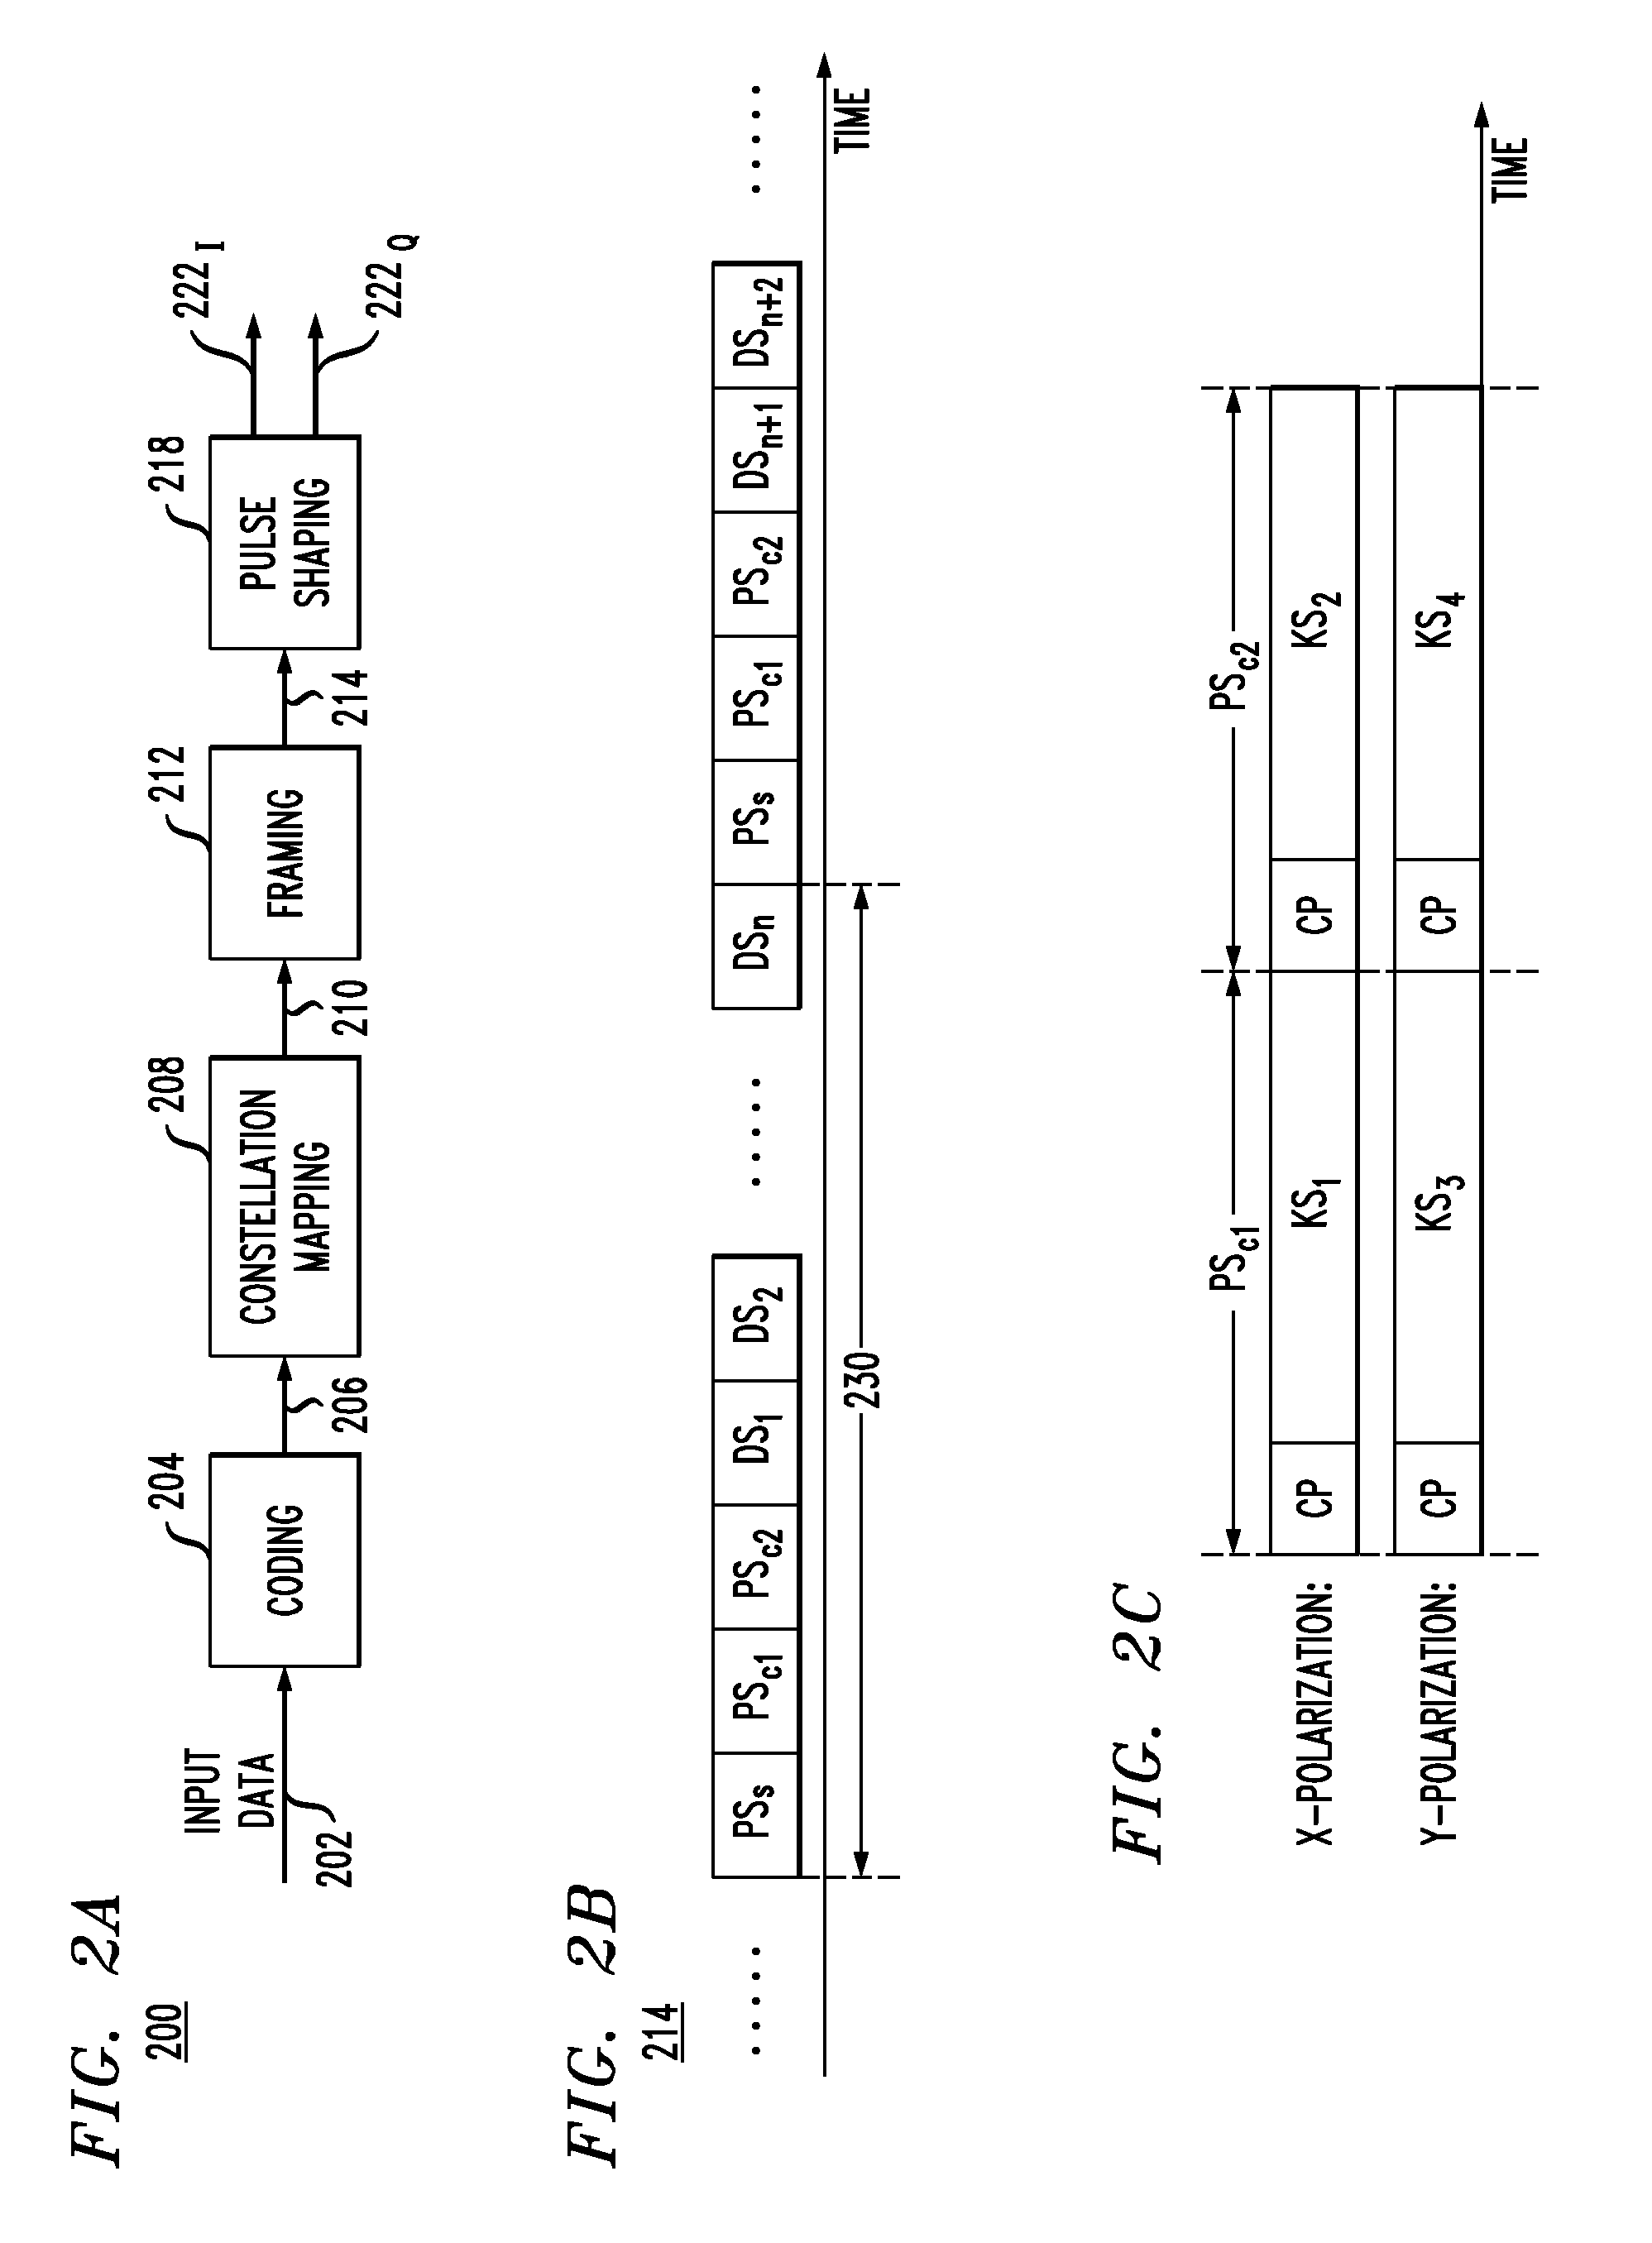 Coherent optical receiver for pilot-assisted data transmission